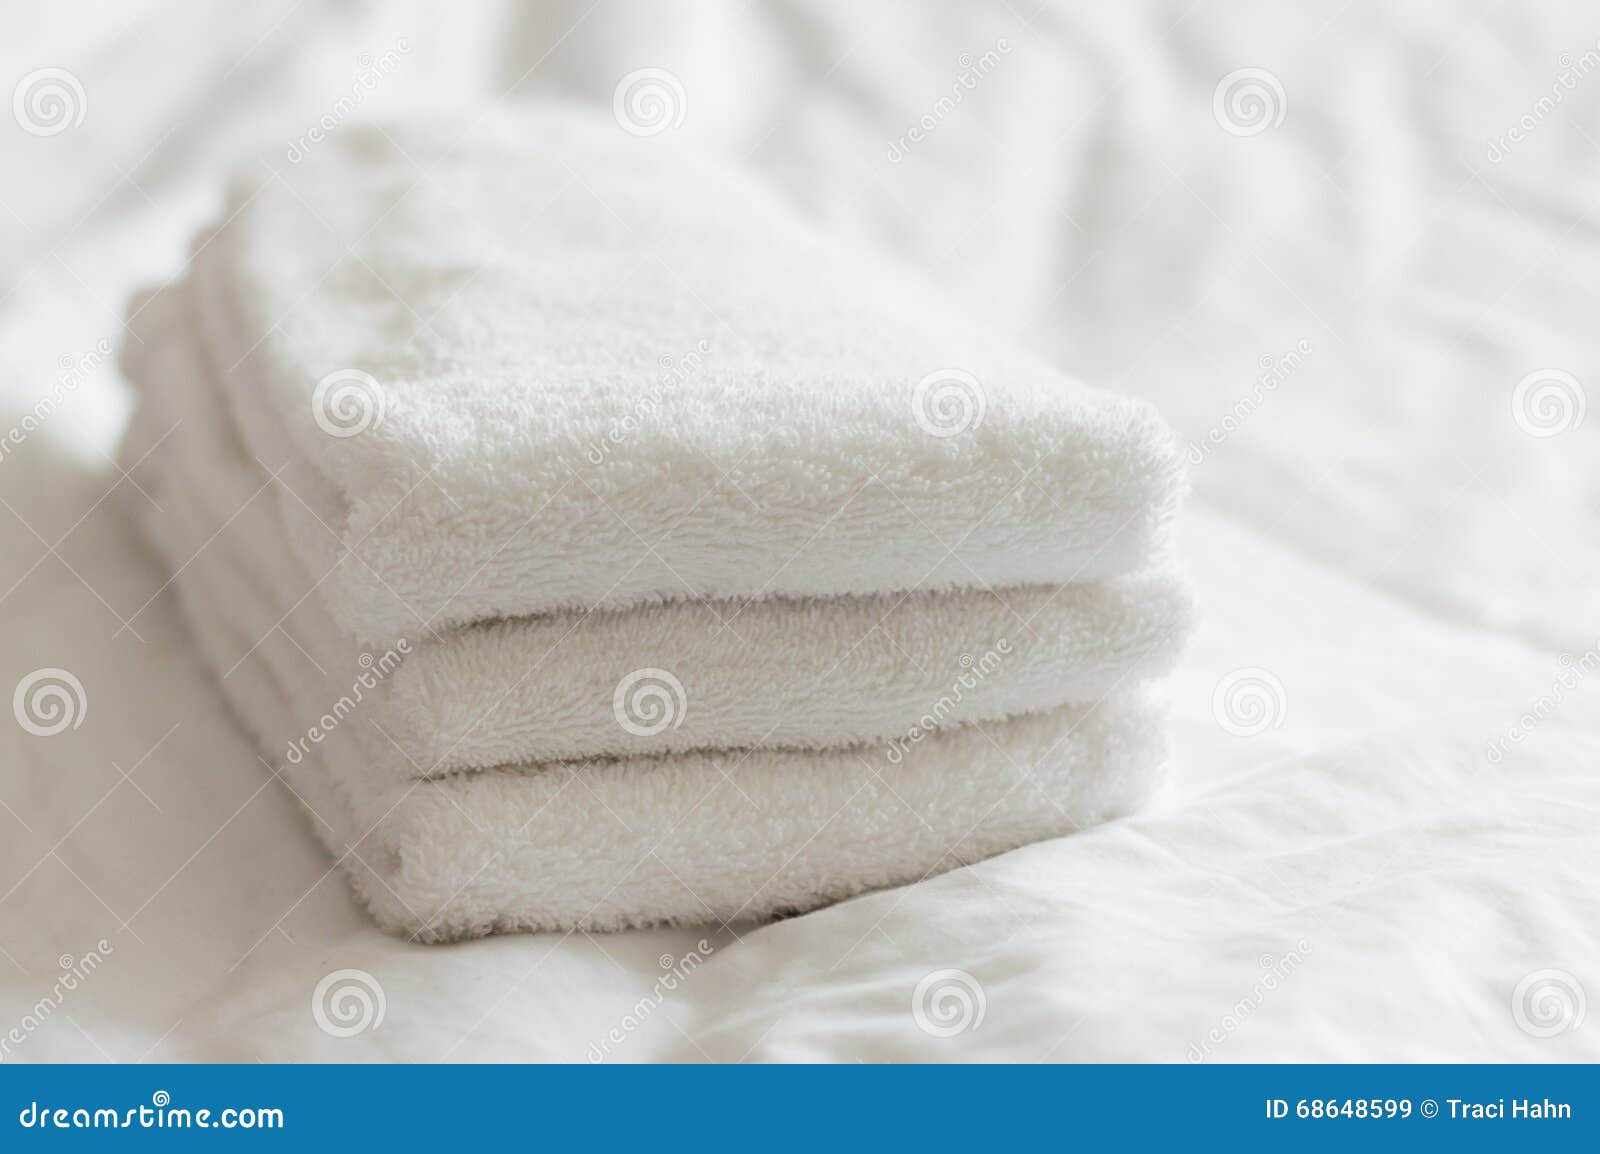 https://thumbs.dreamstime.com/z/freshly-washed-white-hand-towels-stacked-white-bed-bedroom-diffused-light-68648599.jpg